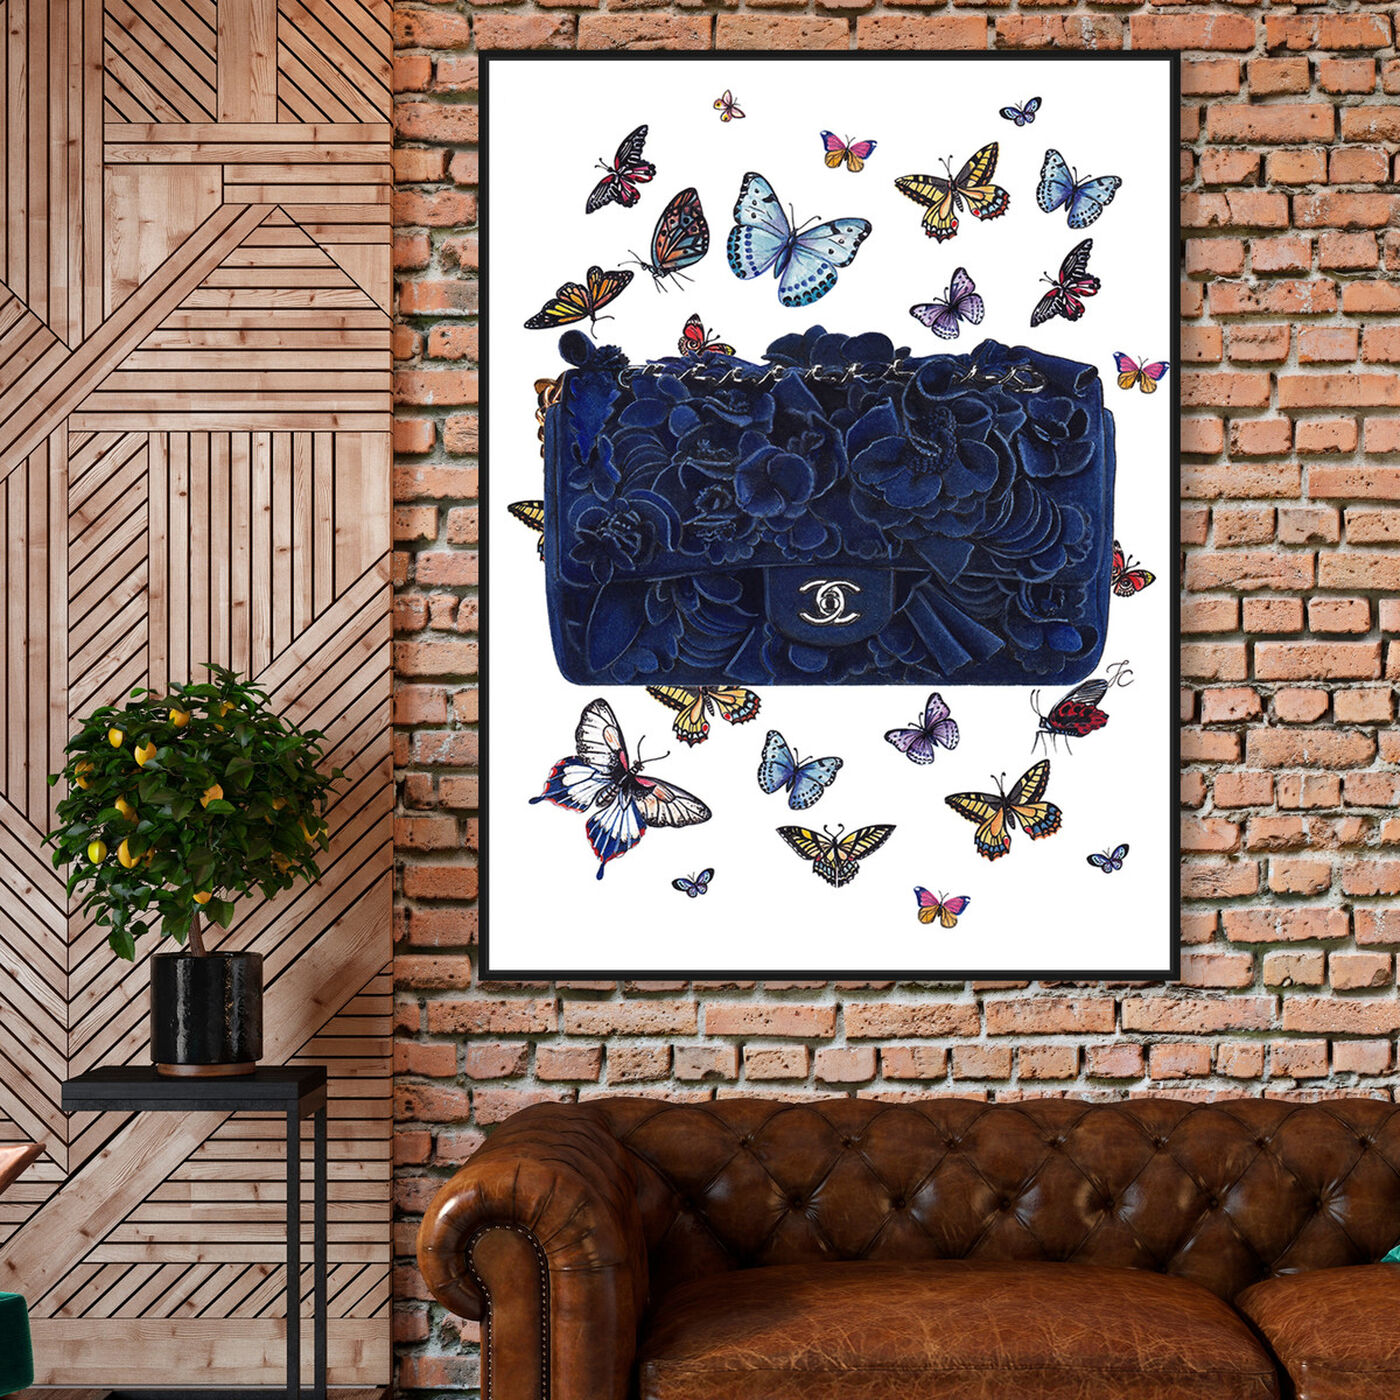 Hanging view of Doll Memories - Butterflies Blue Bag featuring fashion and glam and handbags art.